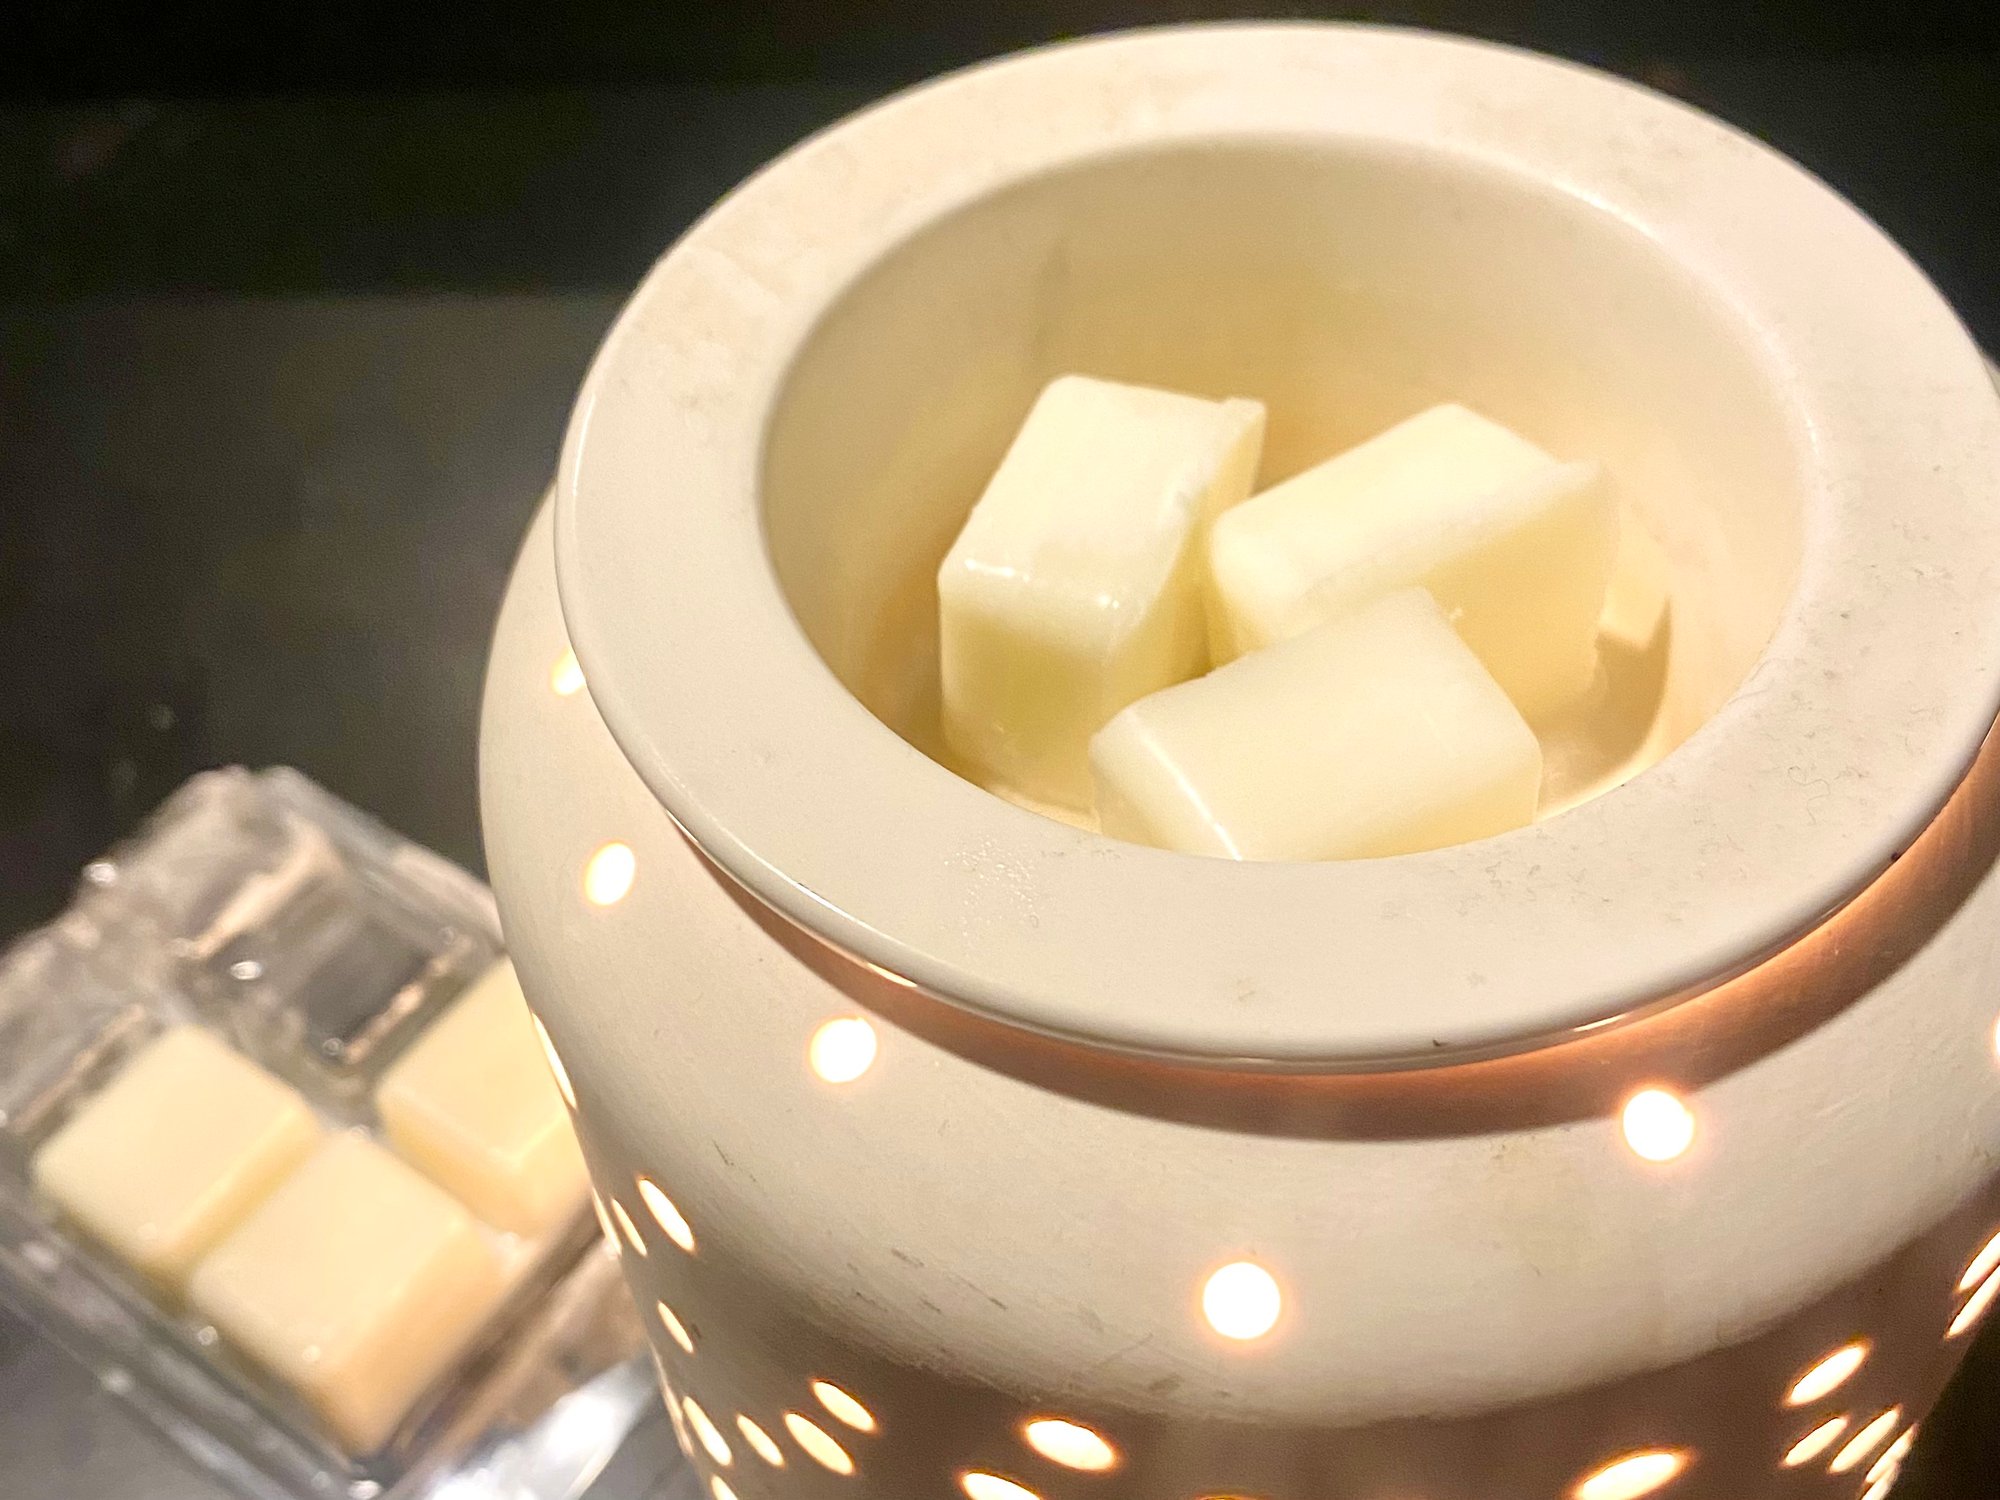 Wholesale Soy Wax Melts – Sixth Spice - Feel Your Own Difference